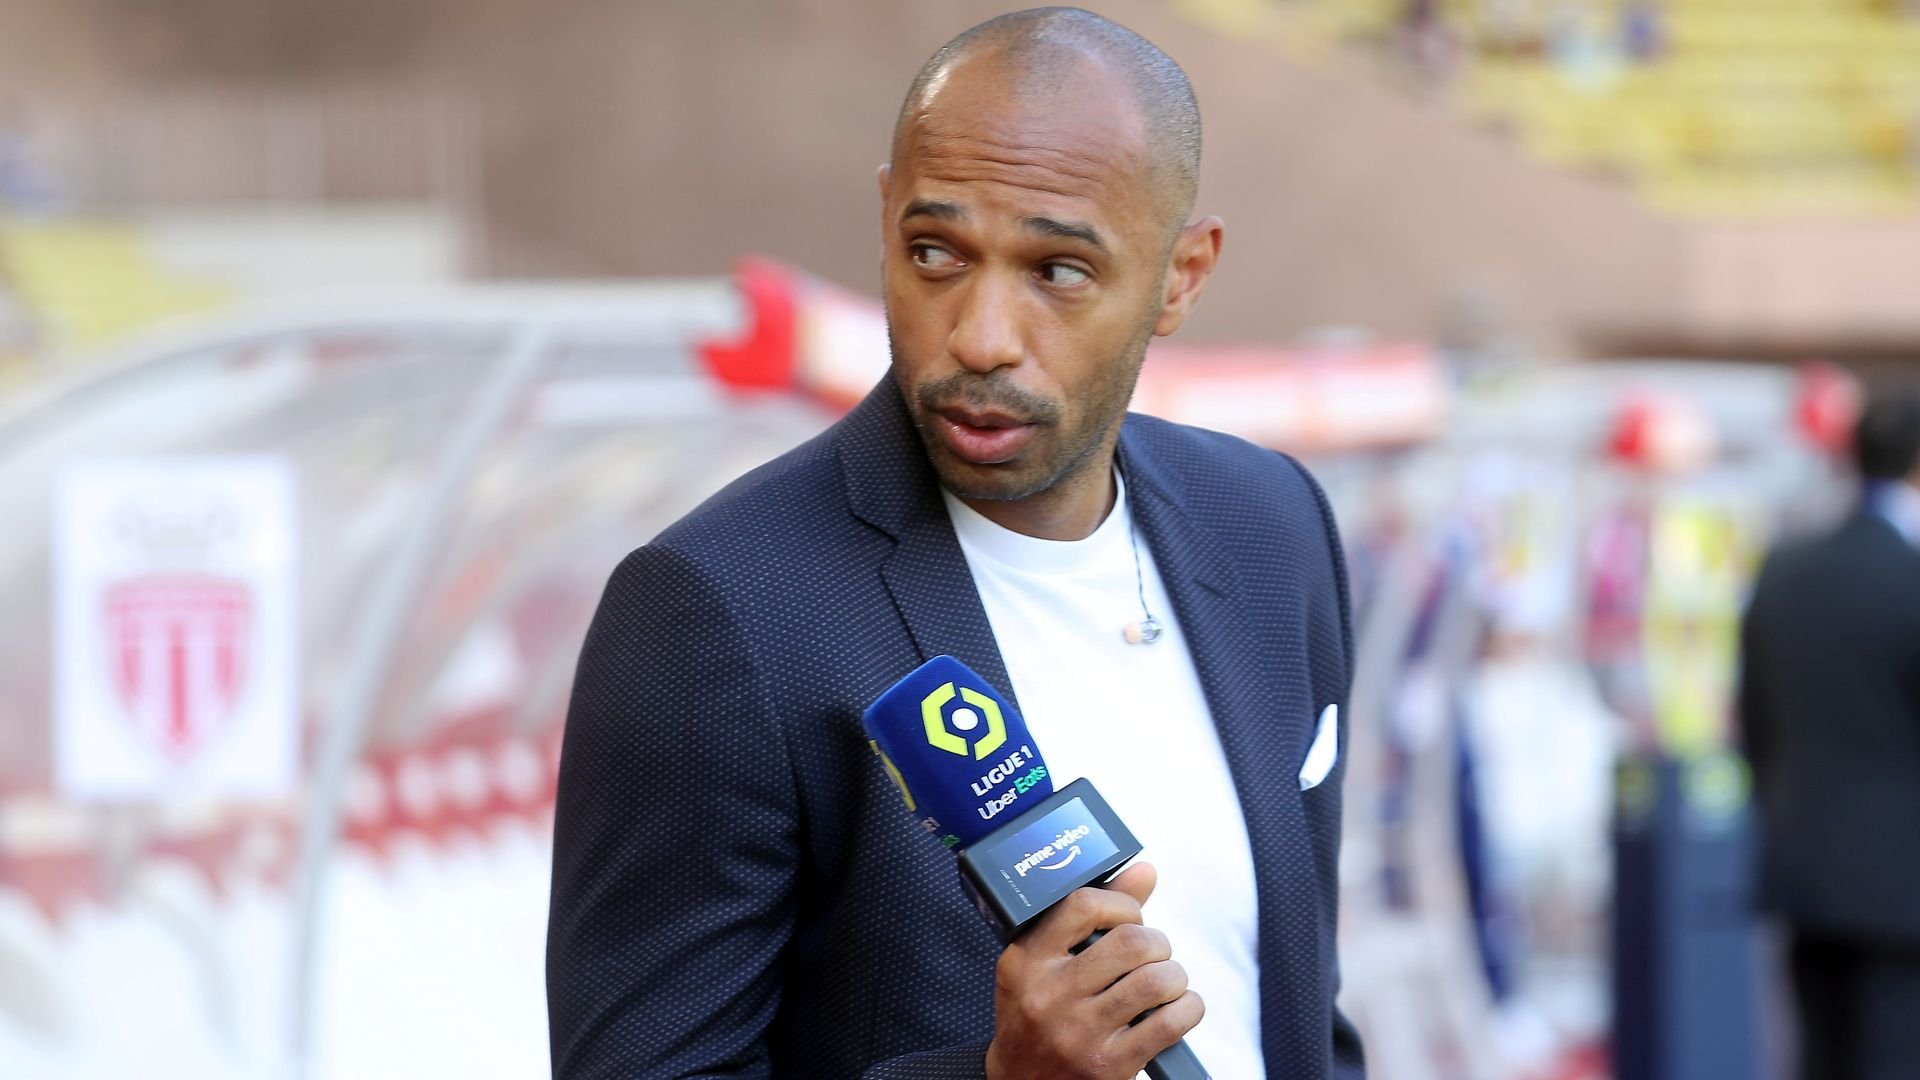 thierry henry 6148a3d9bb952